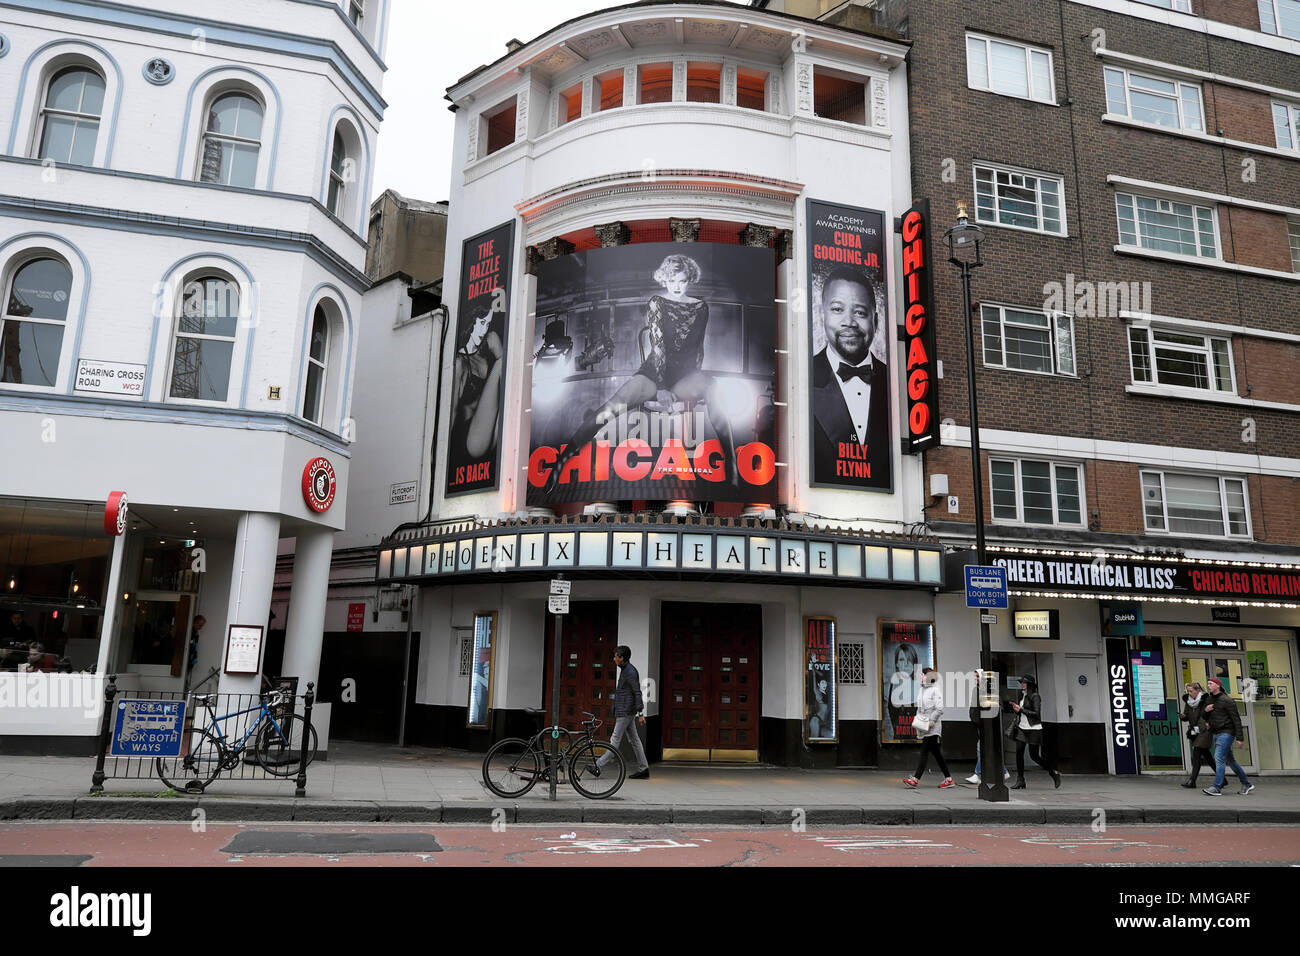 Exterior view of Phoenix Theatre with advertisement for Chicago actor Cuba Gooding Jr on Charing Cross Road in Soho London WC2 England UK KATHY DEWITT Stock Photo